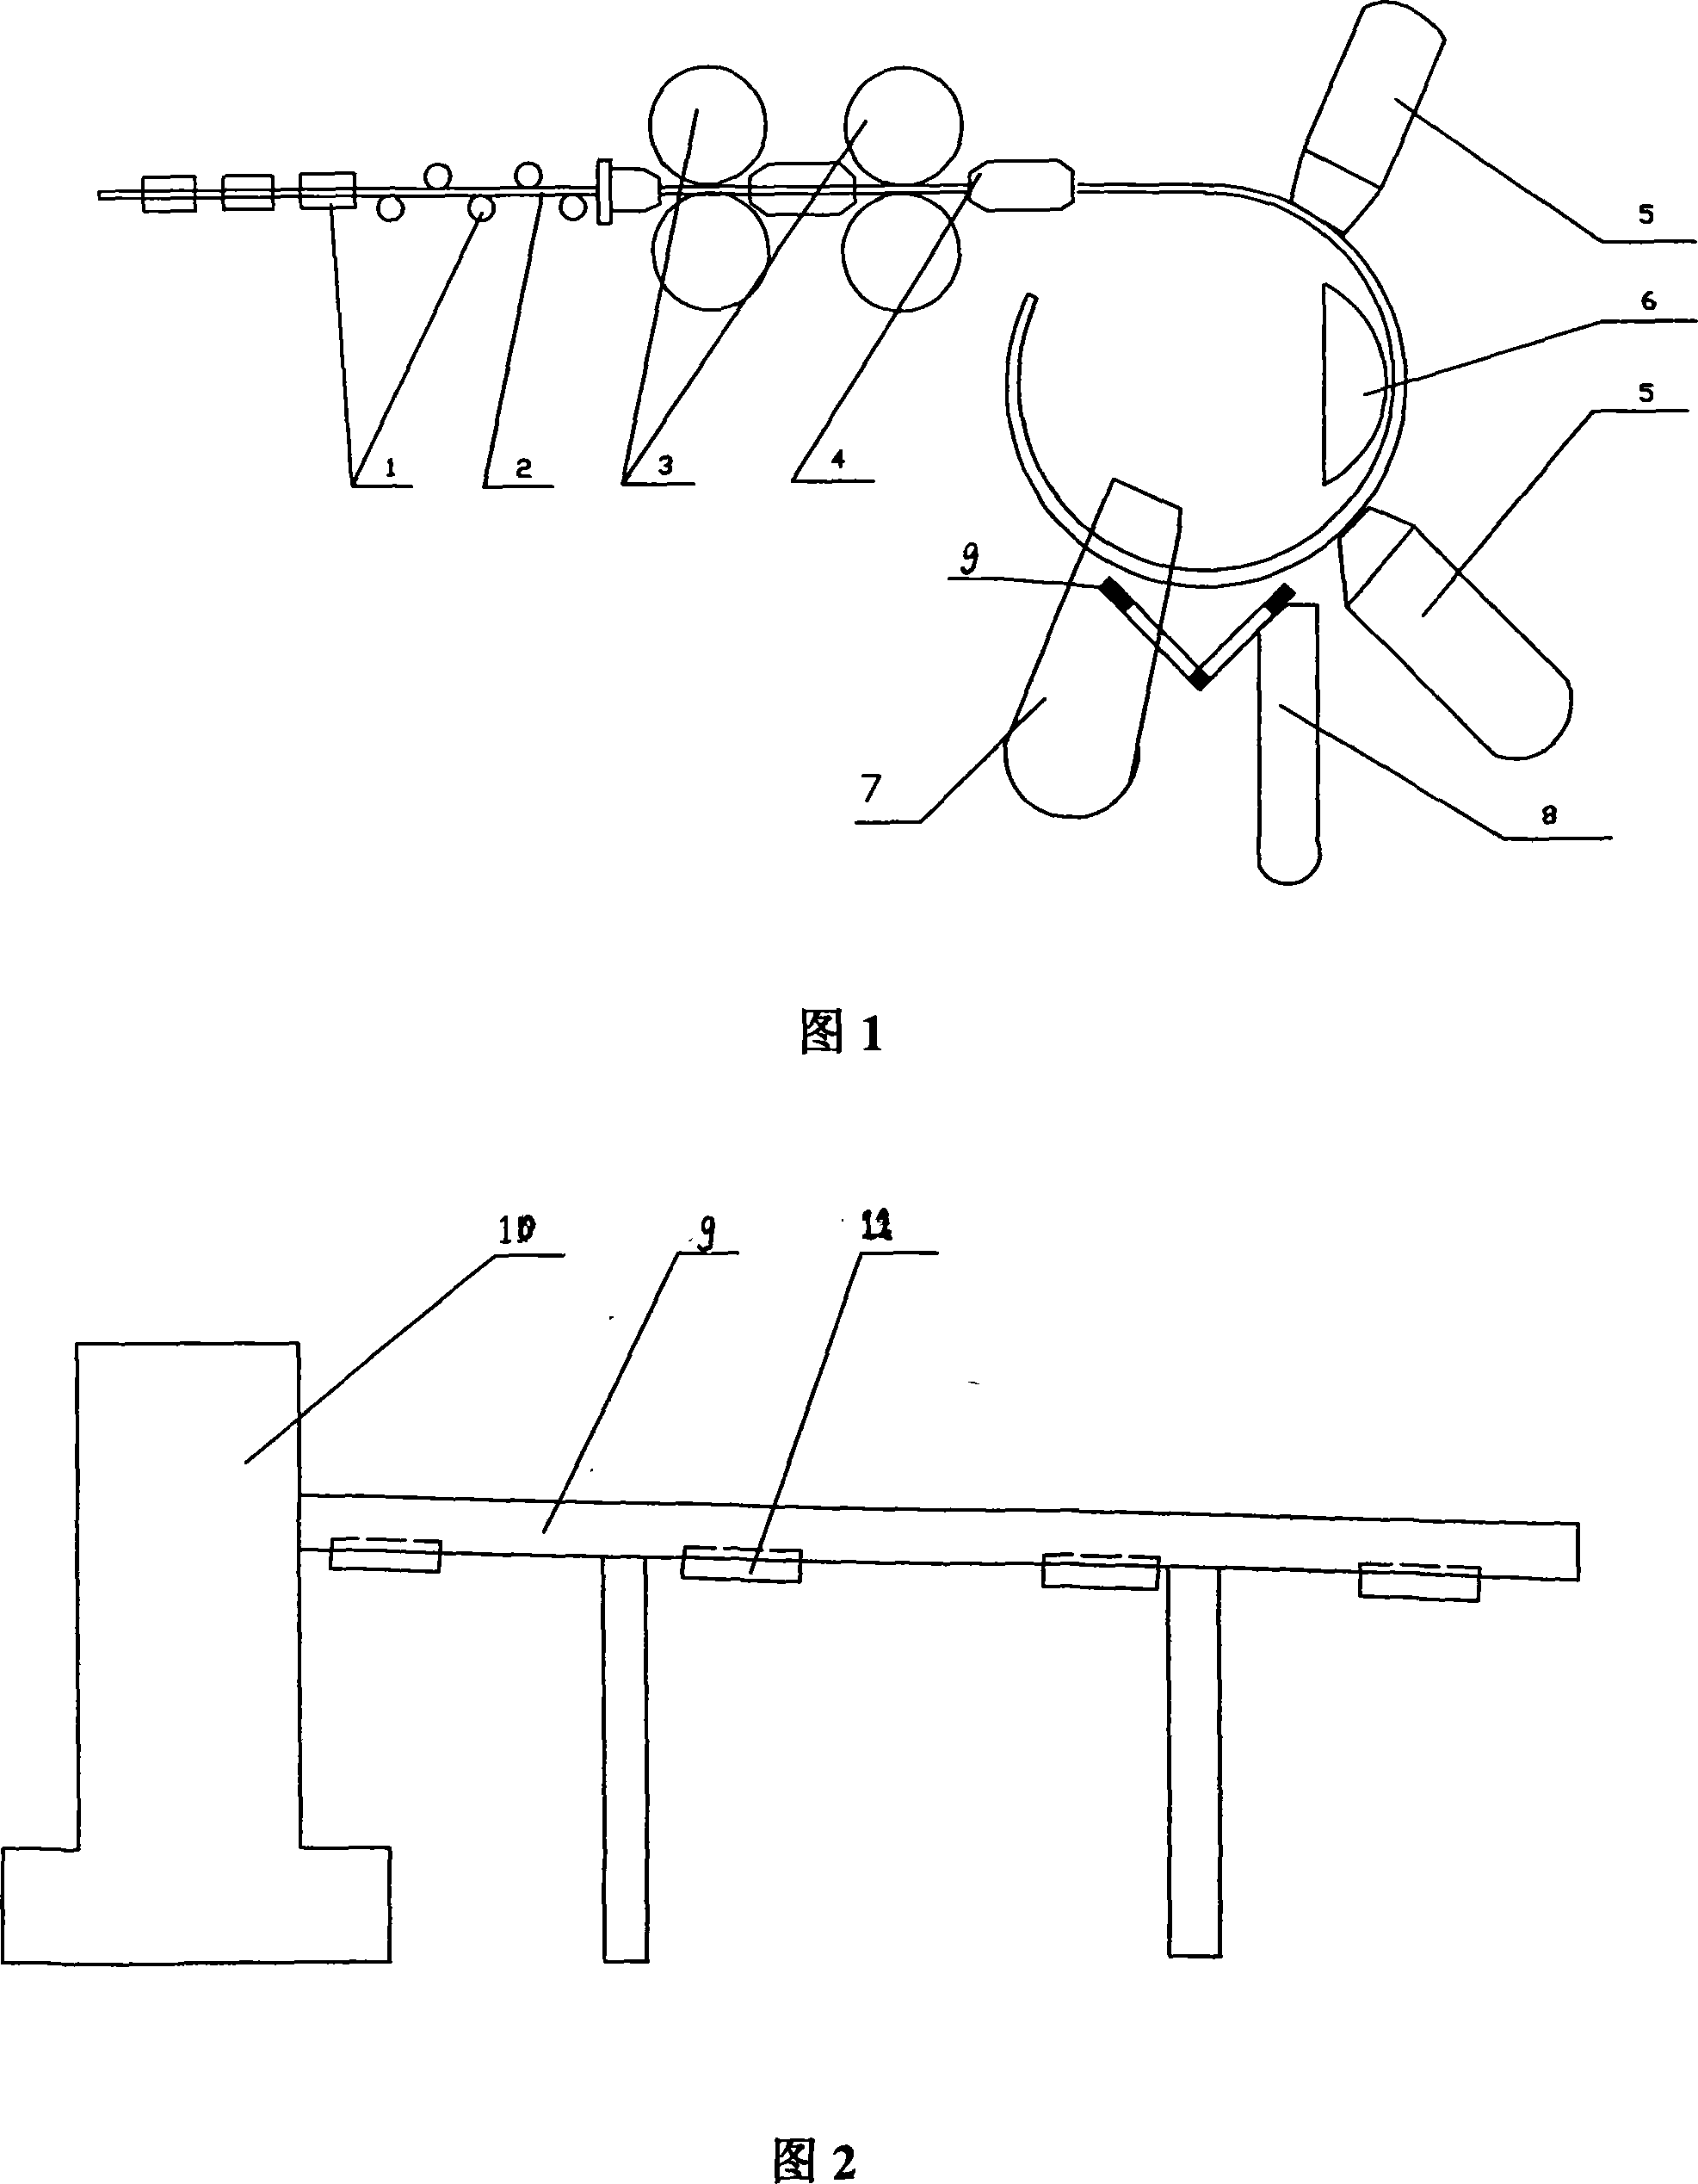 Automatically coiling method for overlength sheath spring